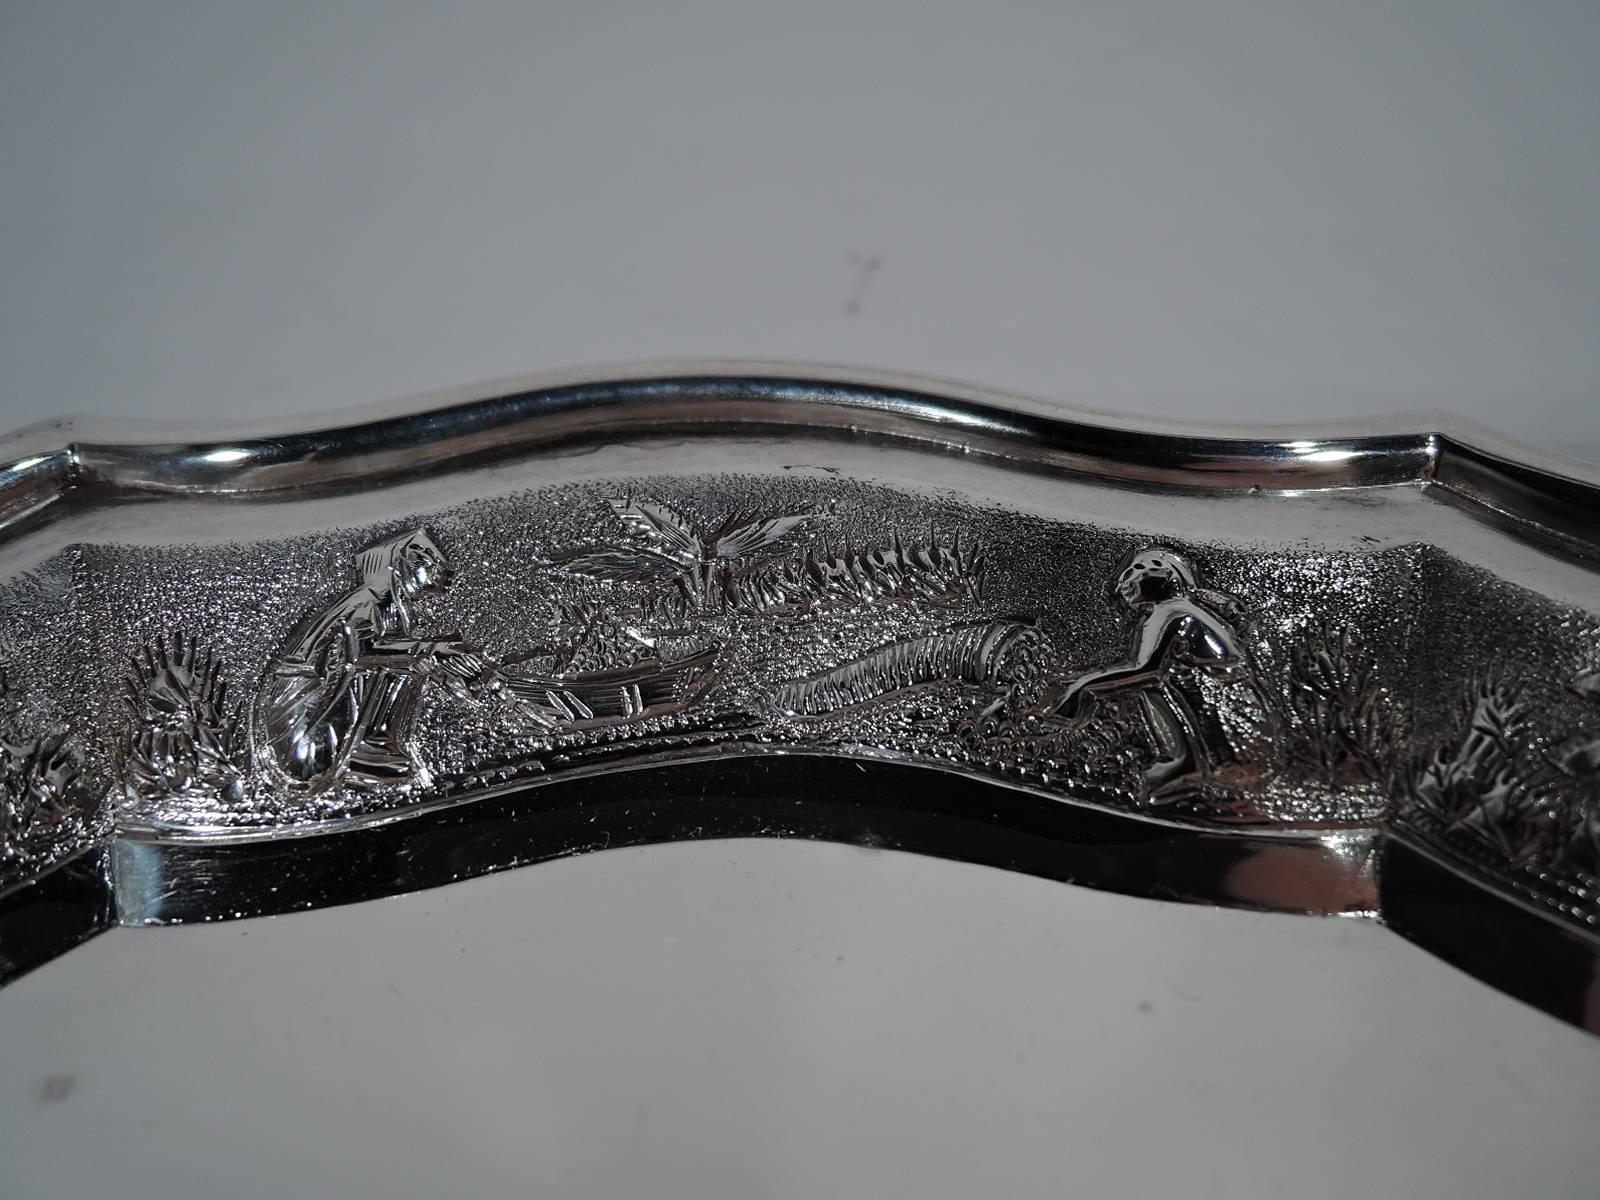 Antique Indo-Chinese silver tray, circa 1910. Circular with curvilinear piecrust rim. Tapering sides with rural scenes in low relief on stippled ground: Farmers, hunters, thatched buildings, and flourishing vegetation. An unusual mix of Eastern